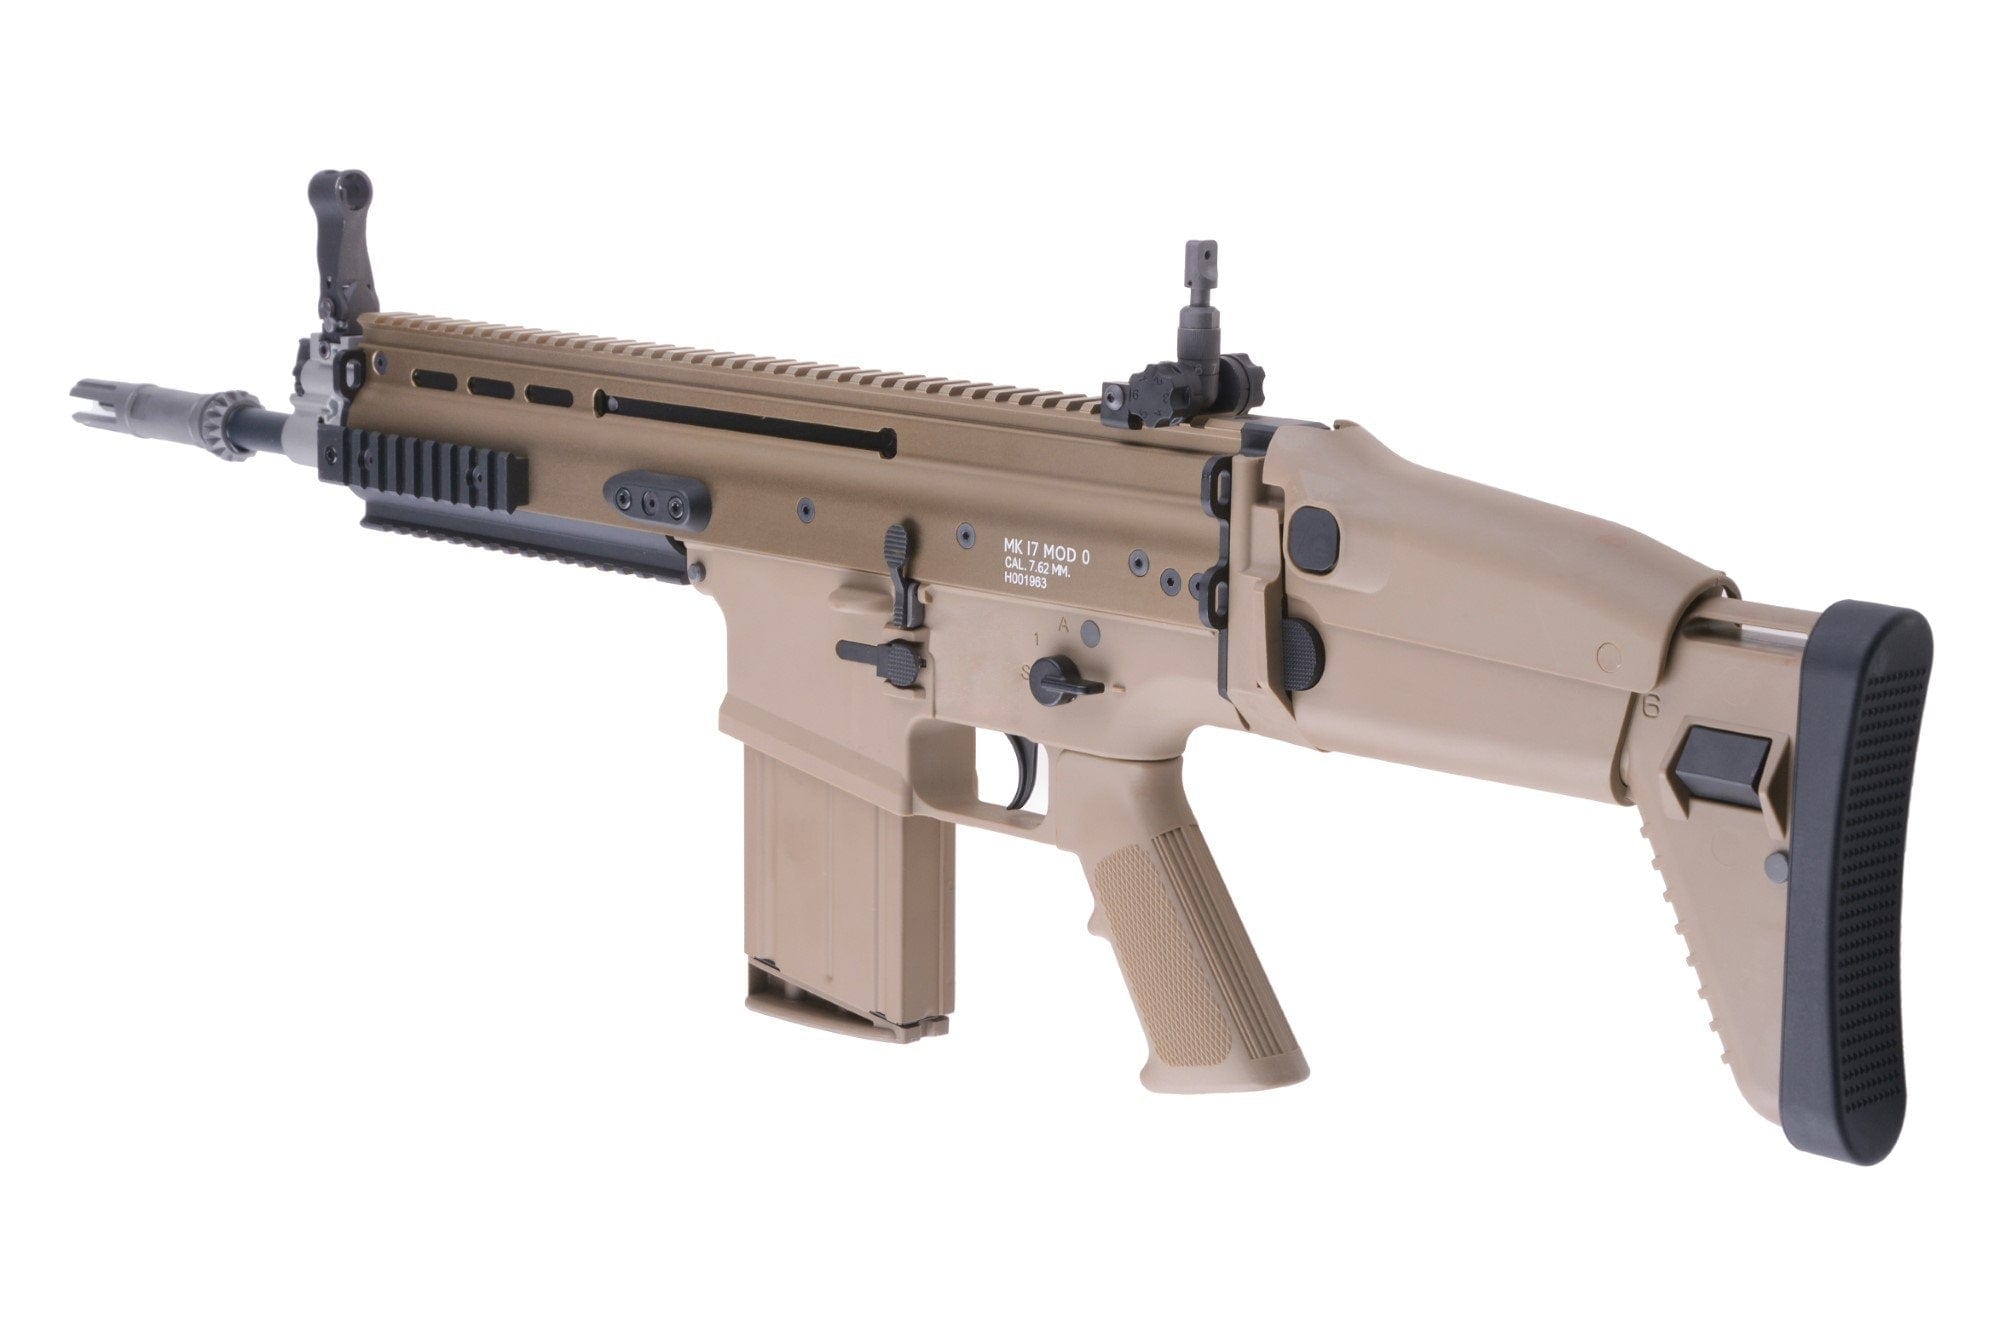 WE MK17 MOD 0 Open Bolt Assault Rifle Replica - Tan by WE on Airsoft Mania Europe